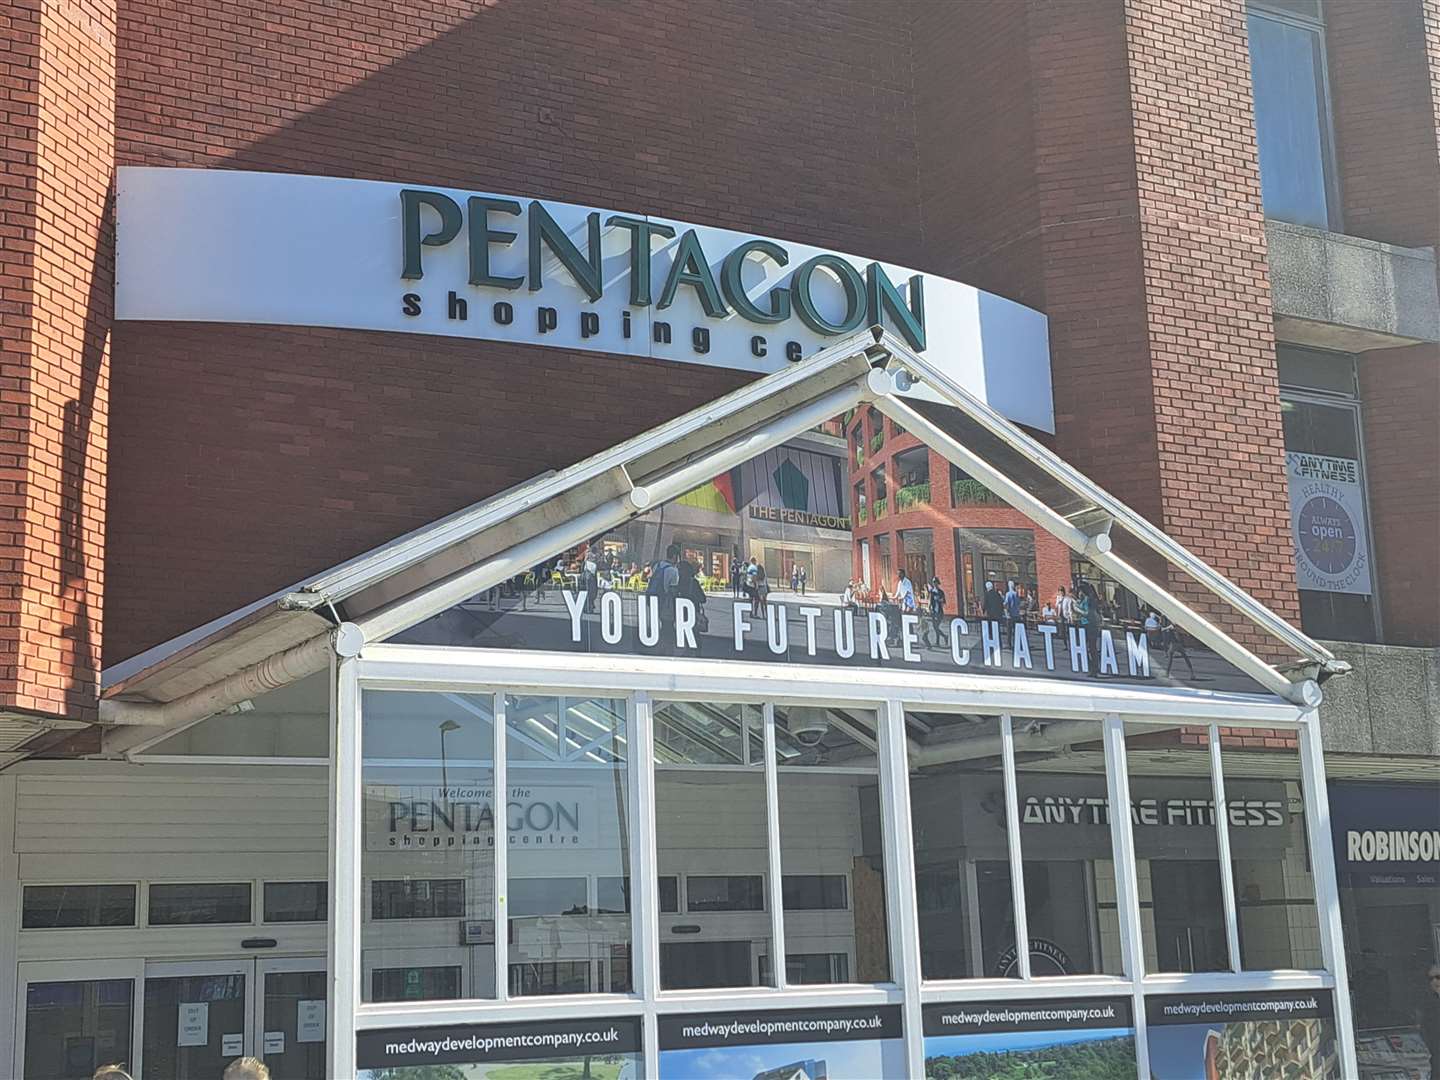 A man has been arrested after the alleged incidents at the Pentagon Centre in Chatham